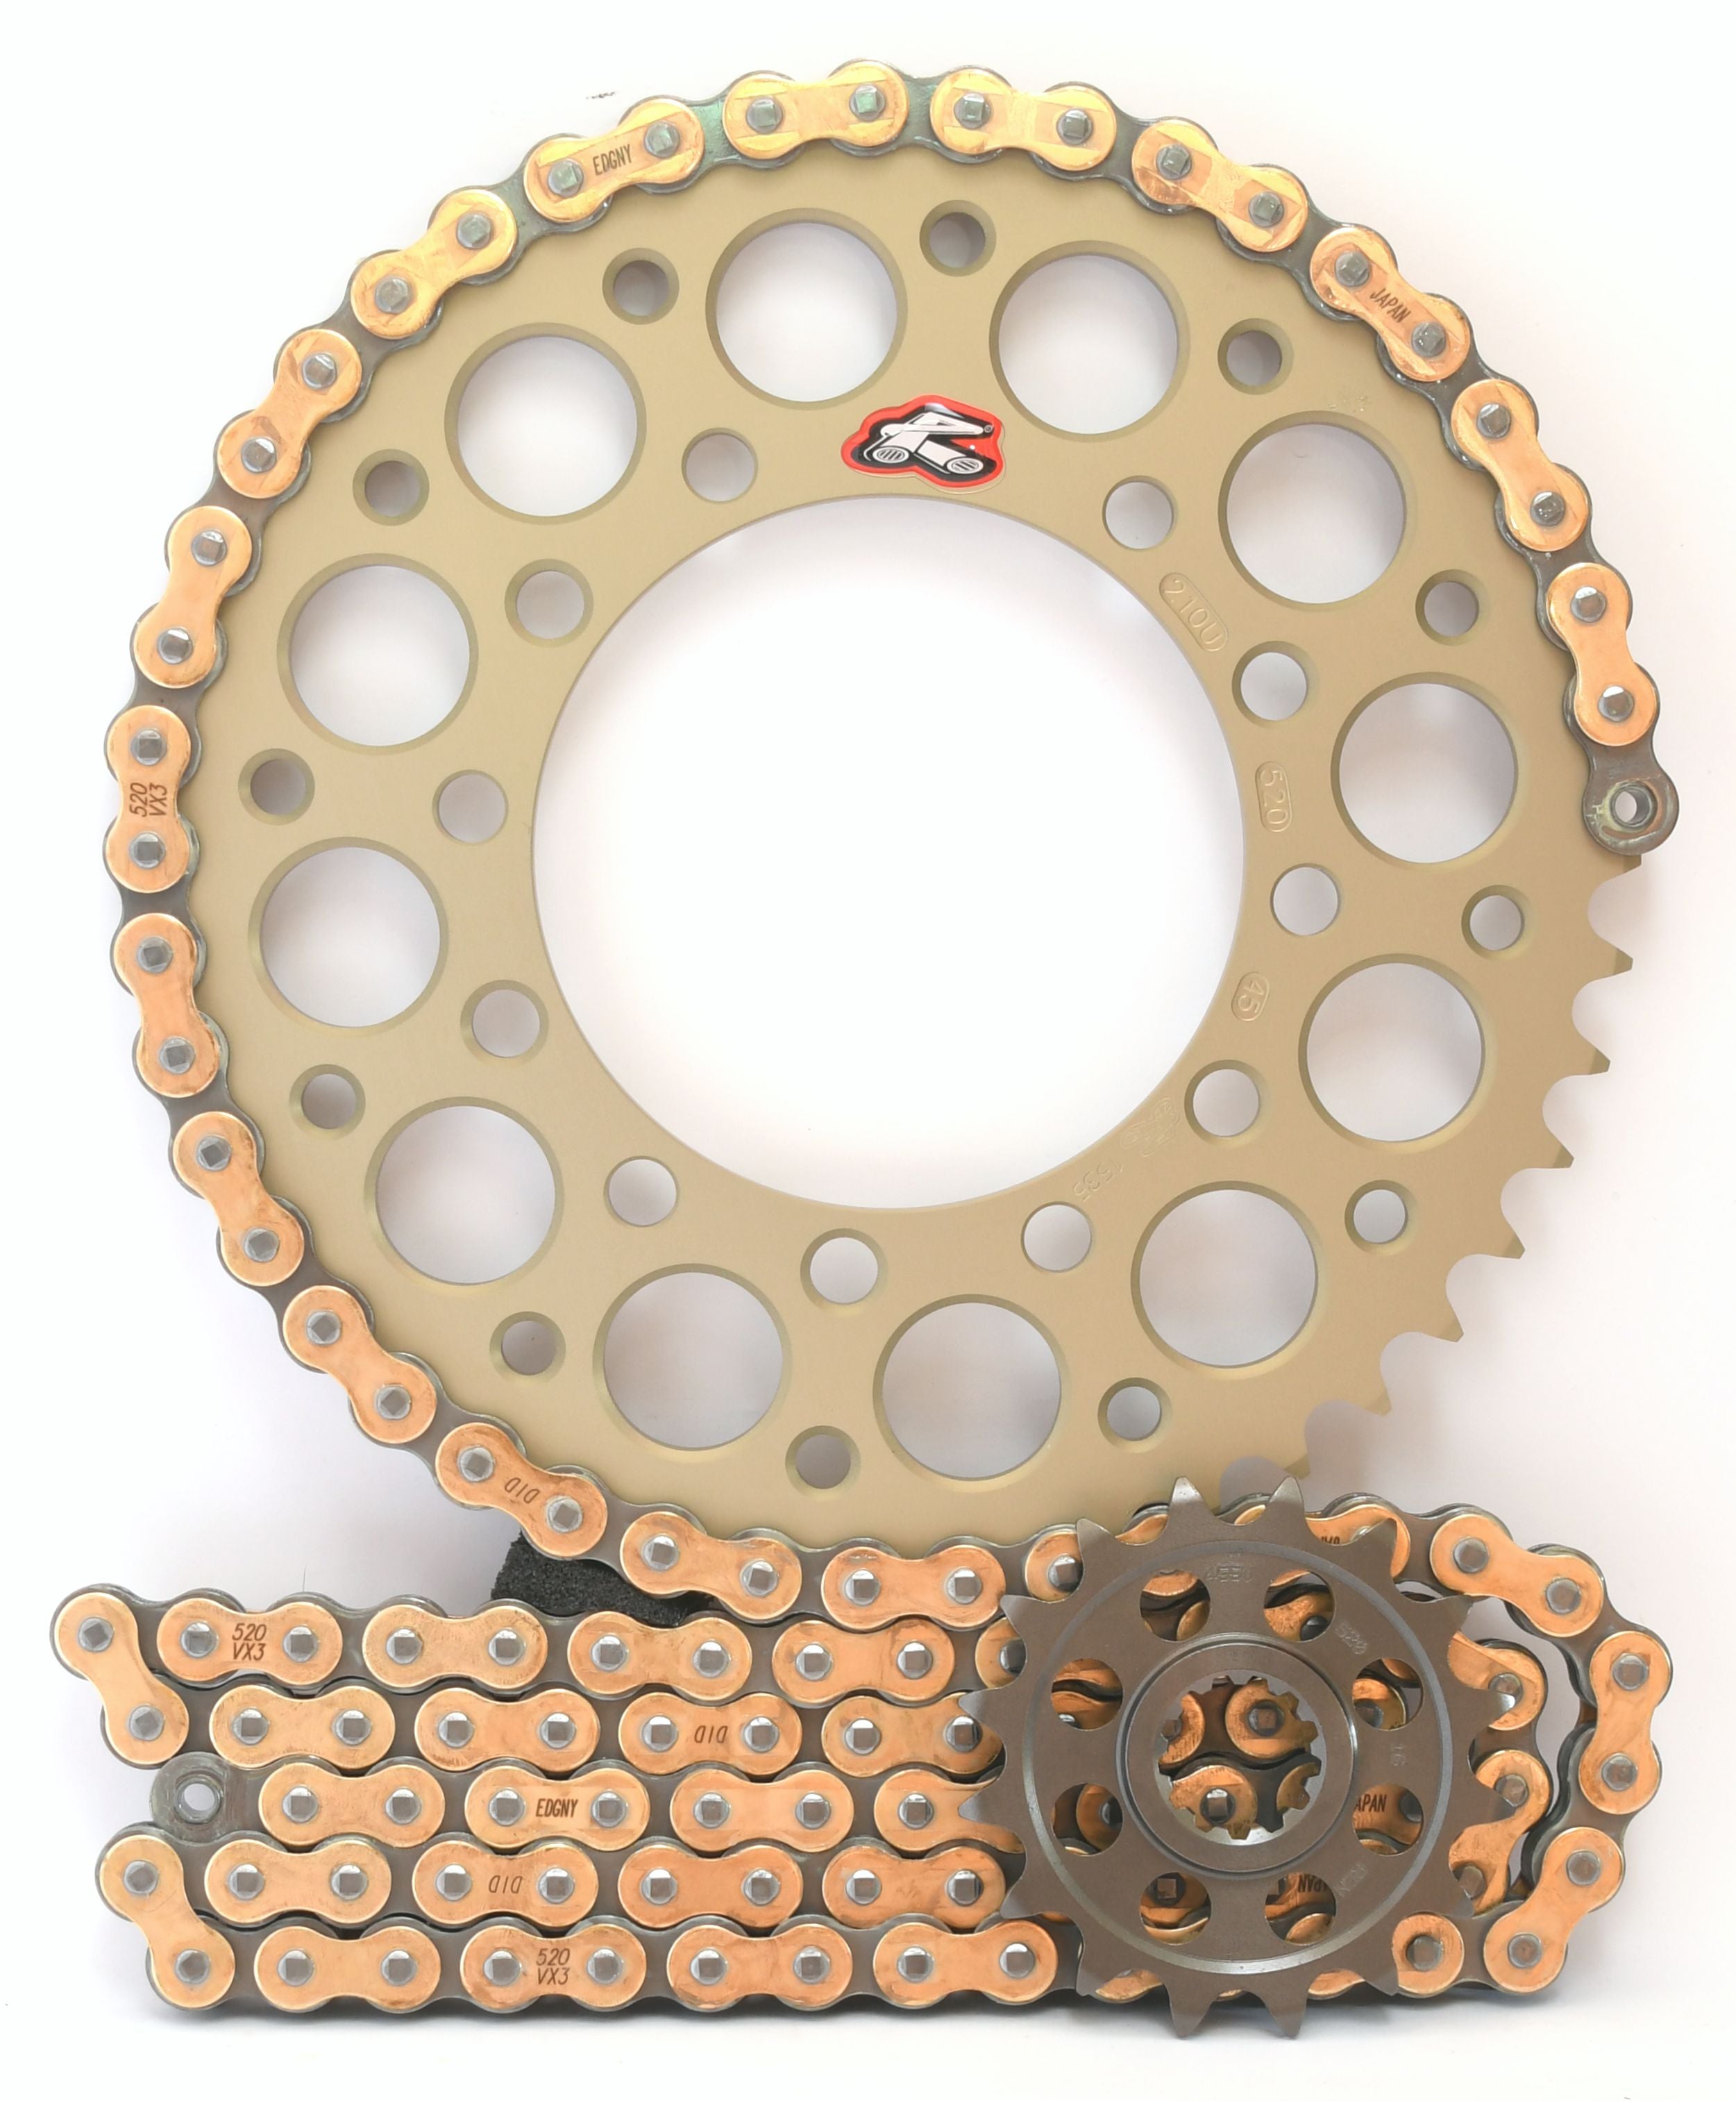 Renthal Ultralight and DID 520 Conversion Chain & Sprocket Kit for Suzuki GSX-R1000 2017> - Choose Your Gearing